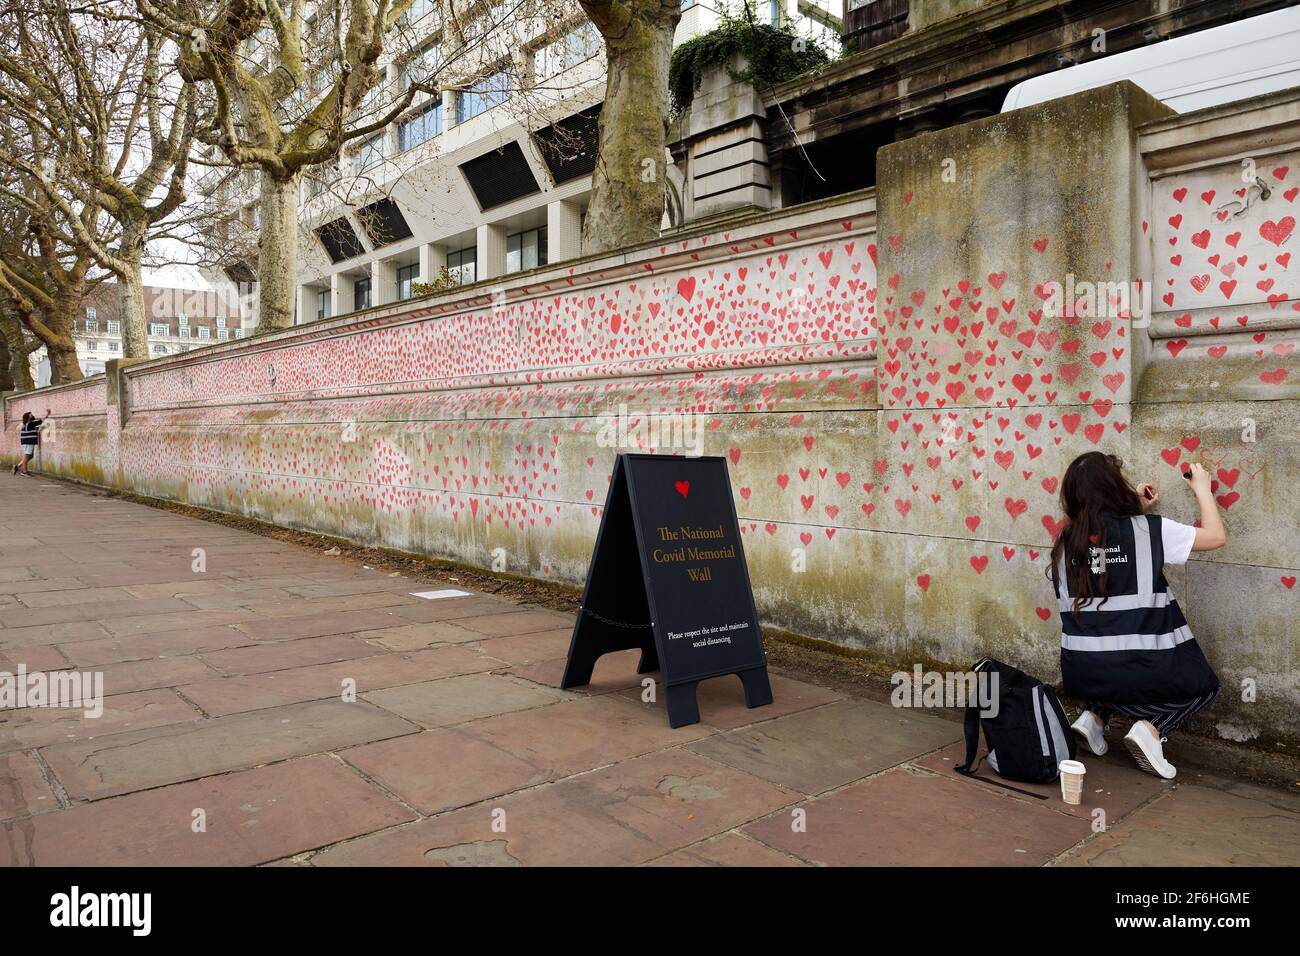 London, UK - 31 Mar 2021: Family and friends of Covid-19 victims paint red hearts at the National Covid Memorial Wall in front of St. Thomas' Hospital in central London. Each individually drawn heart  represents a victim of the coronavirus virus. Stock Photo